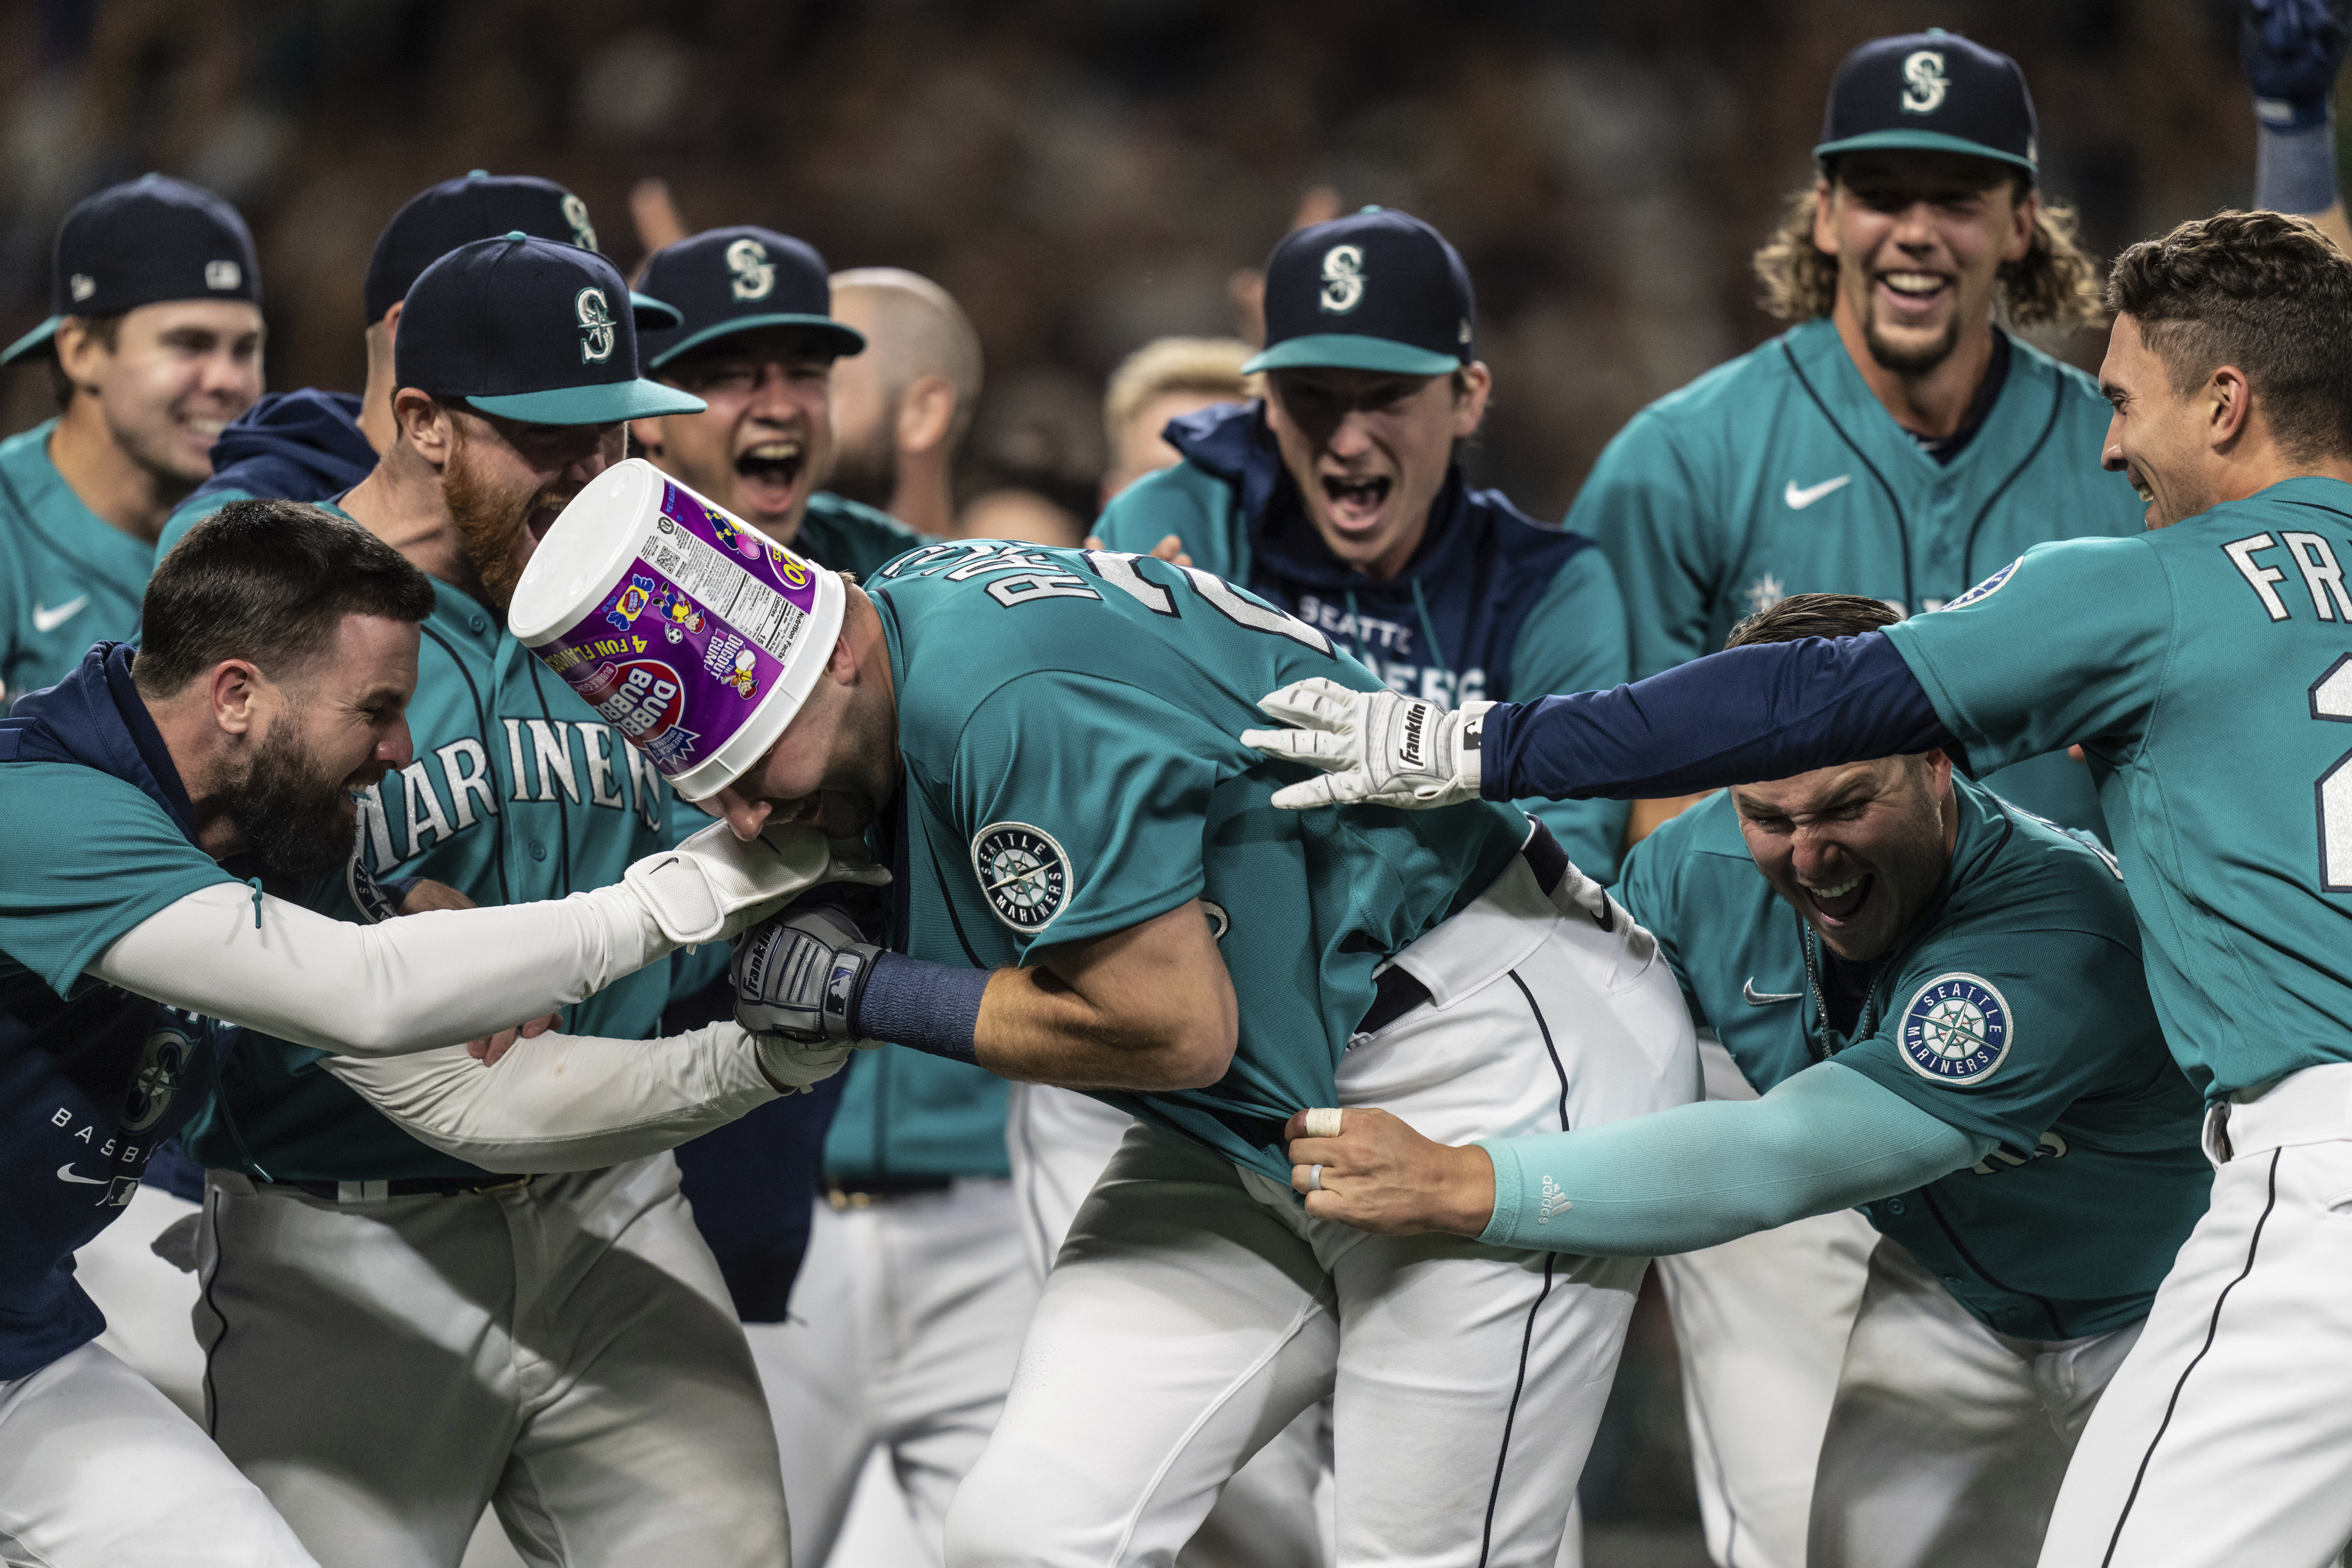 Mariners' Servais 'can't say enough about the job' Kyle Seager has